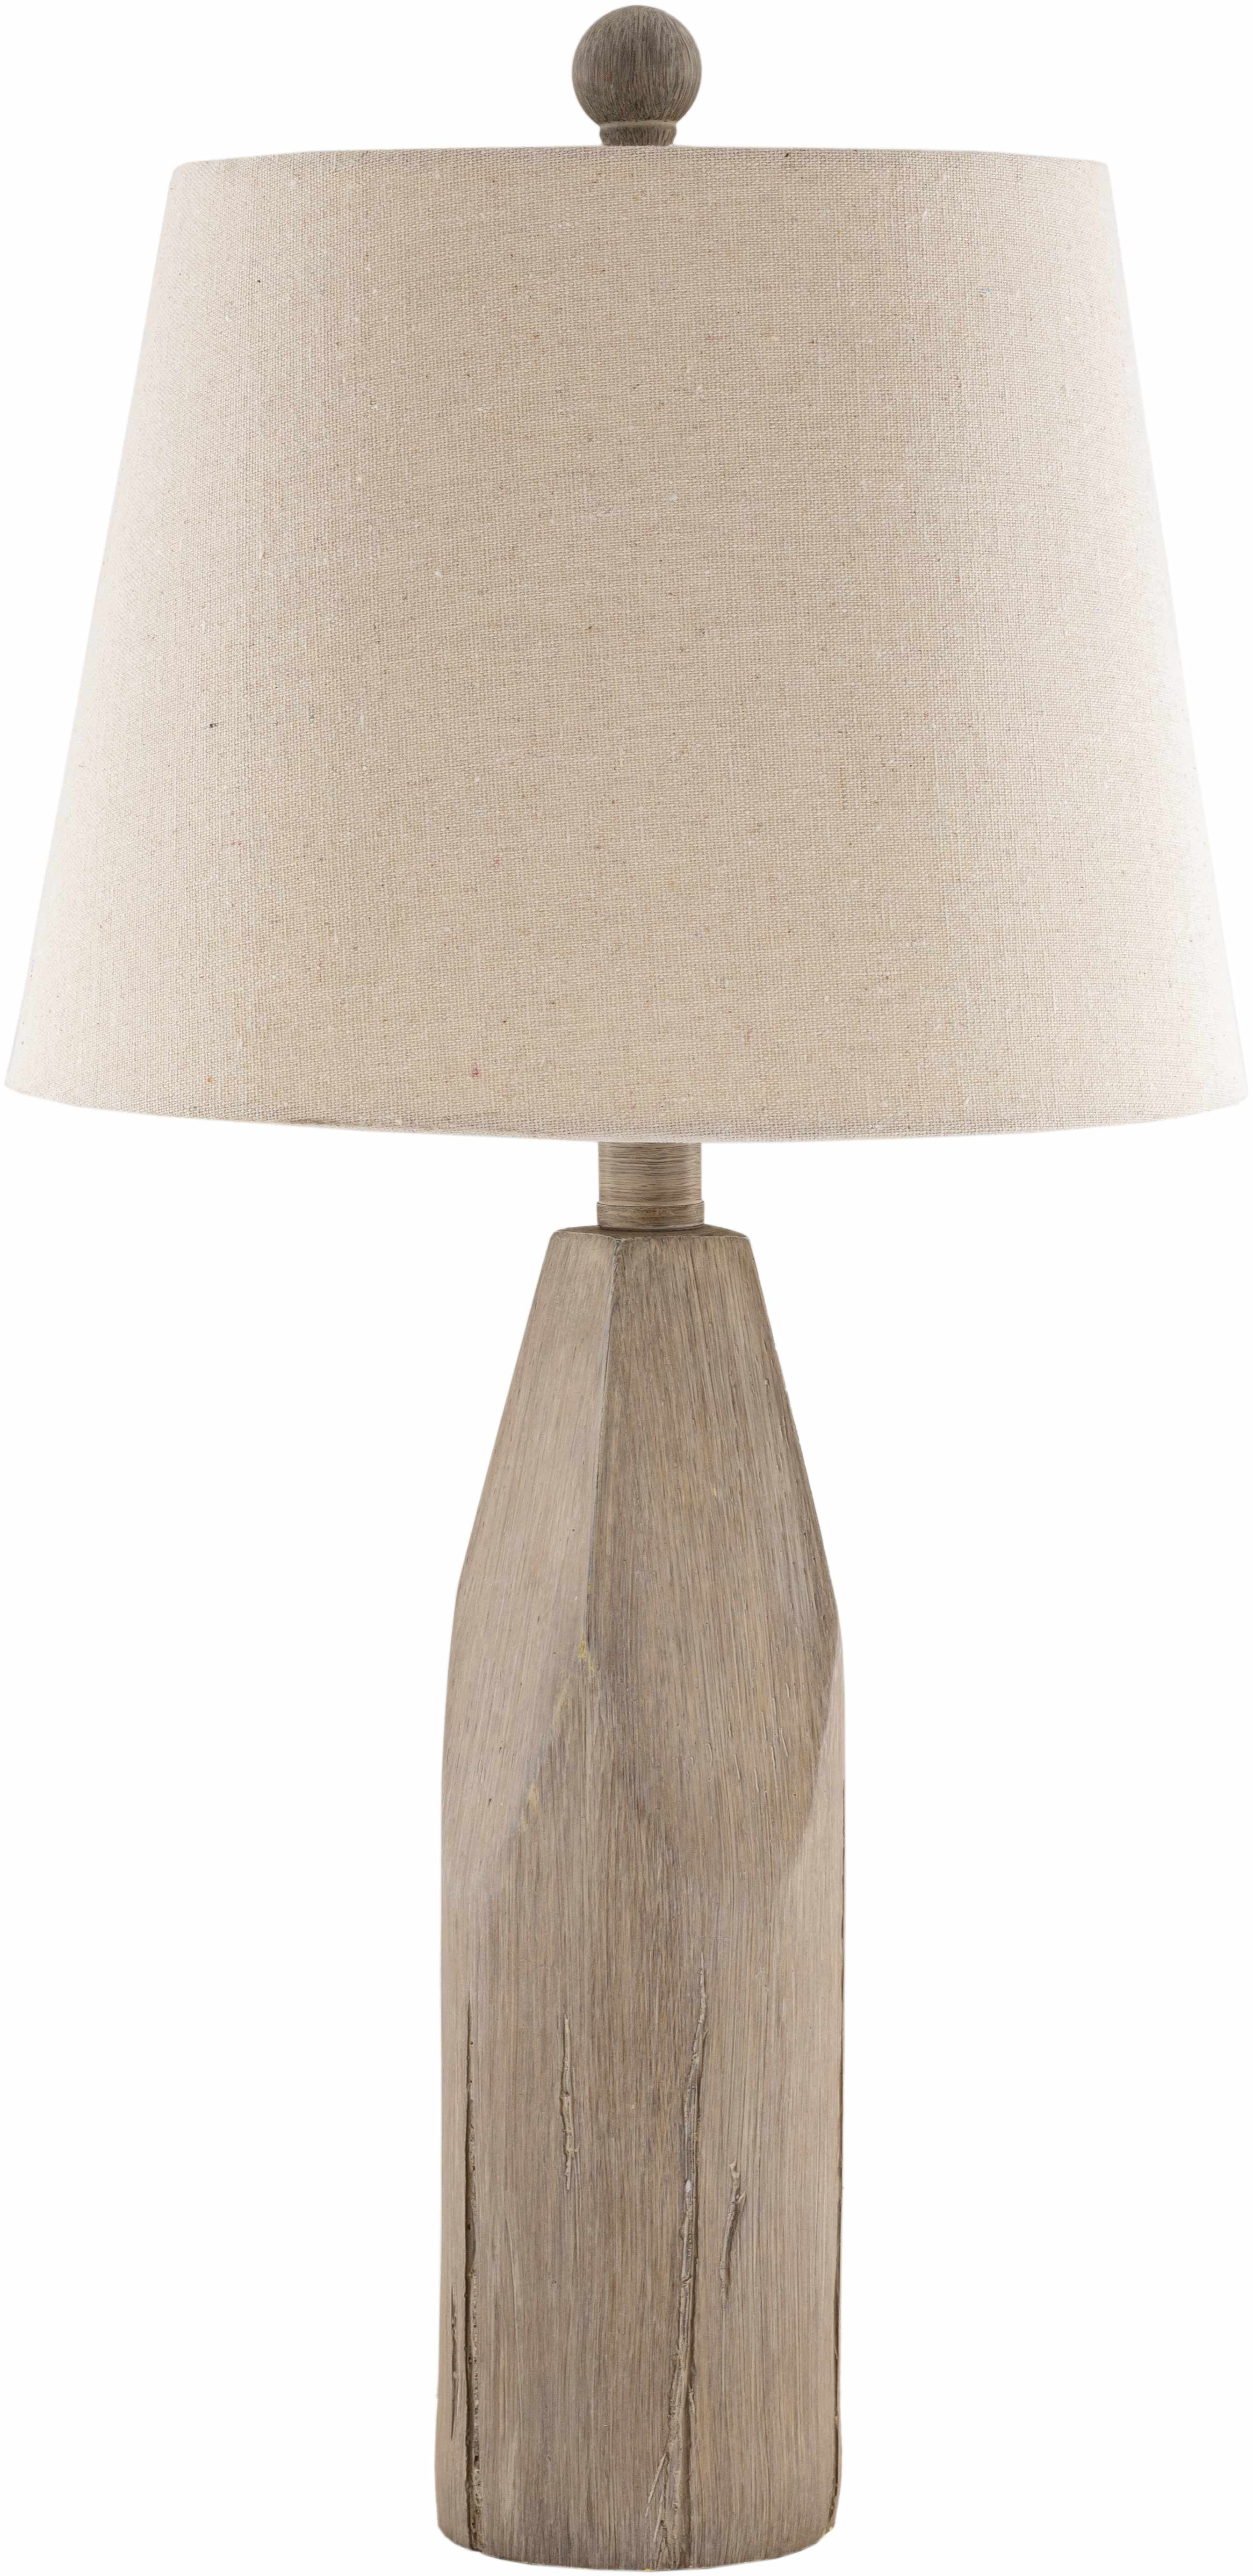 Simala Table Lamp | Boutique Rugs